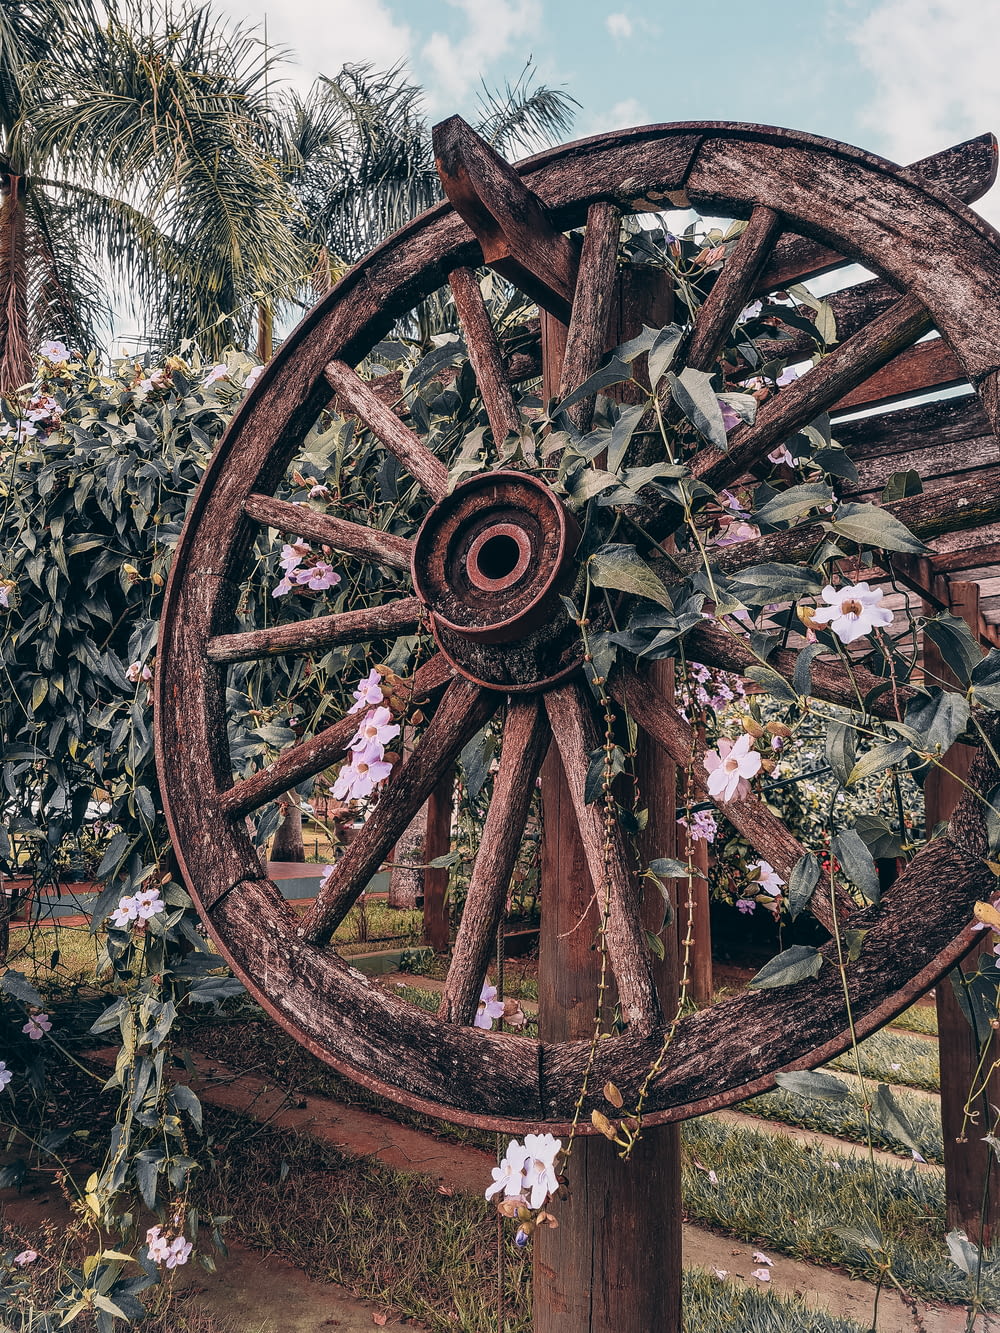 a wooden wheel with flowers